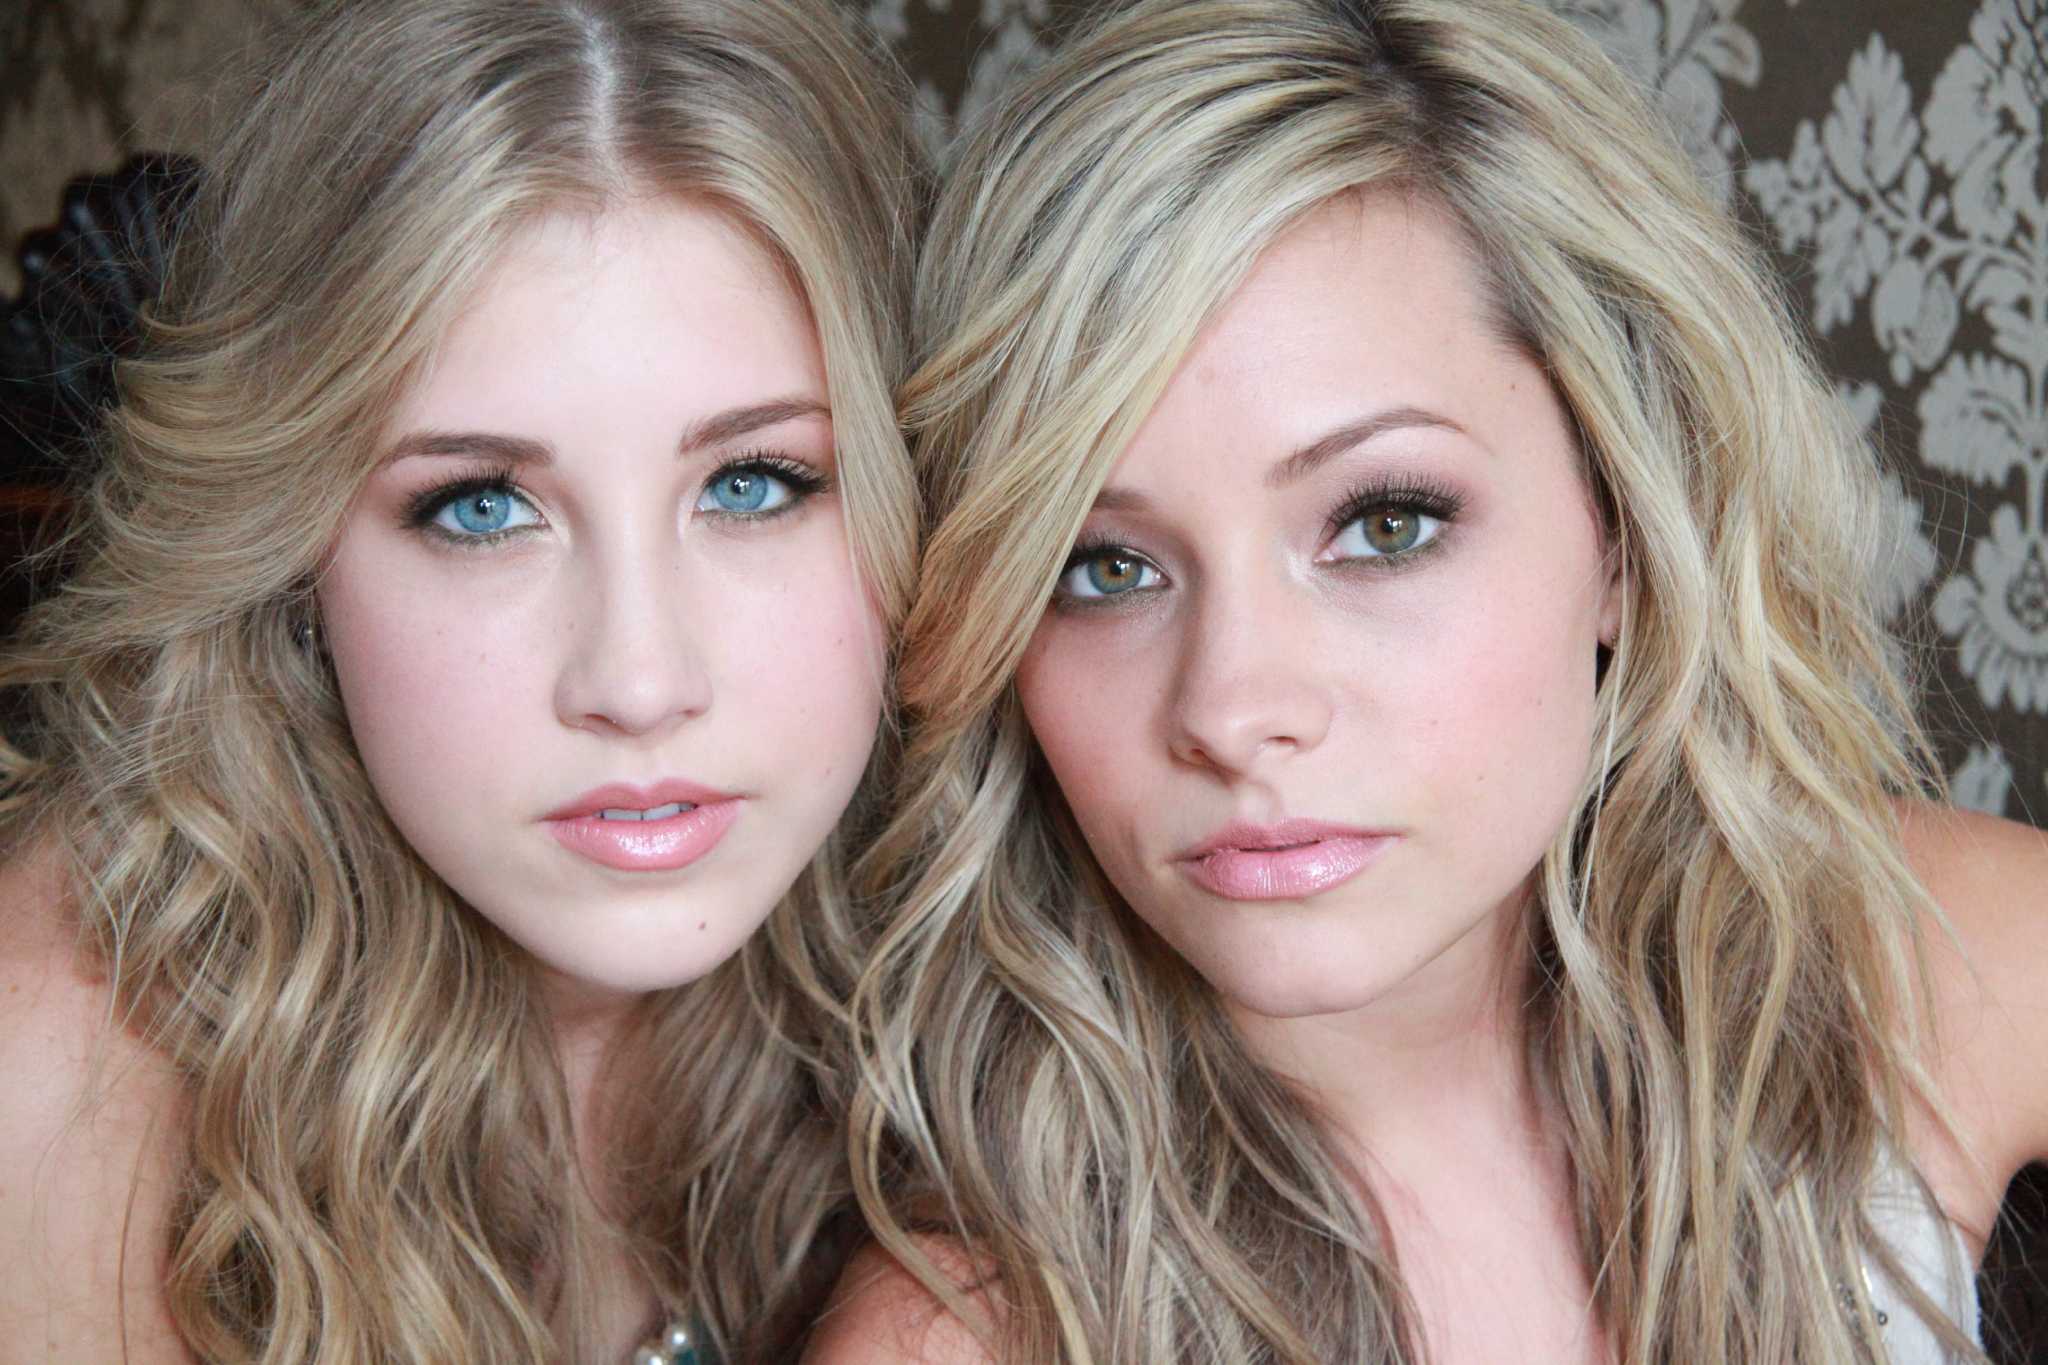 Twang, harmony poise Maddie and Tae for success